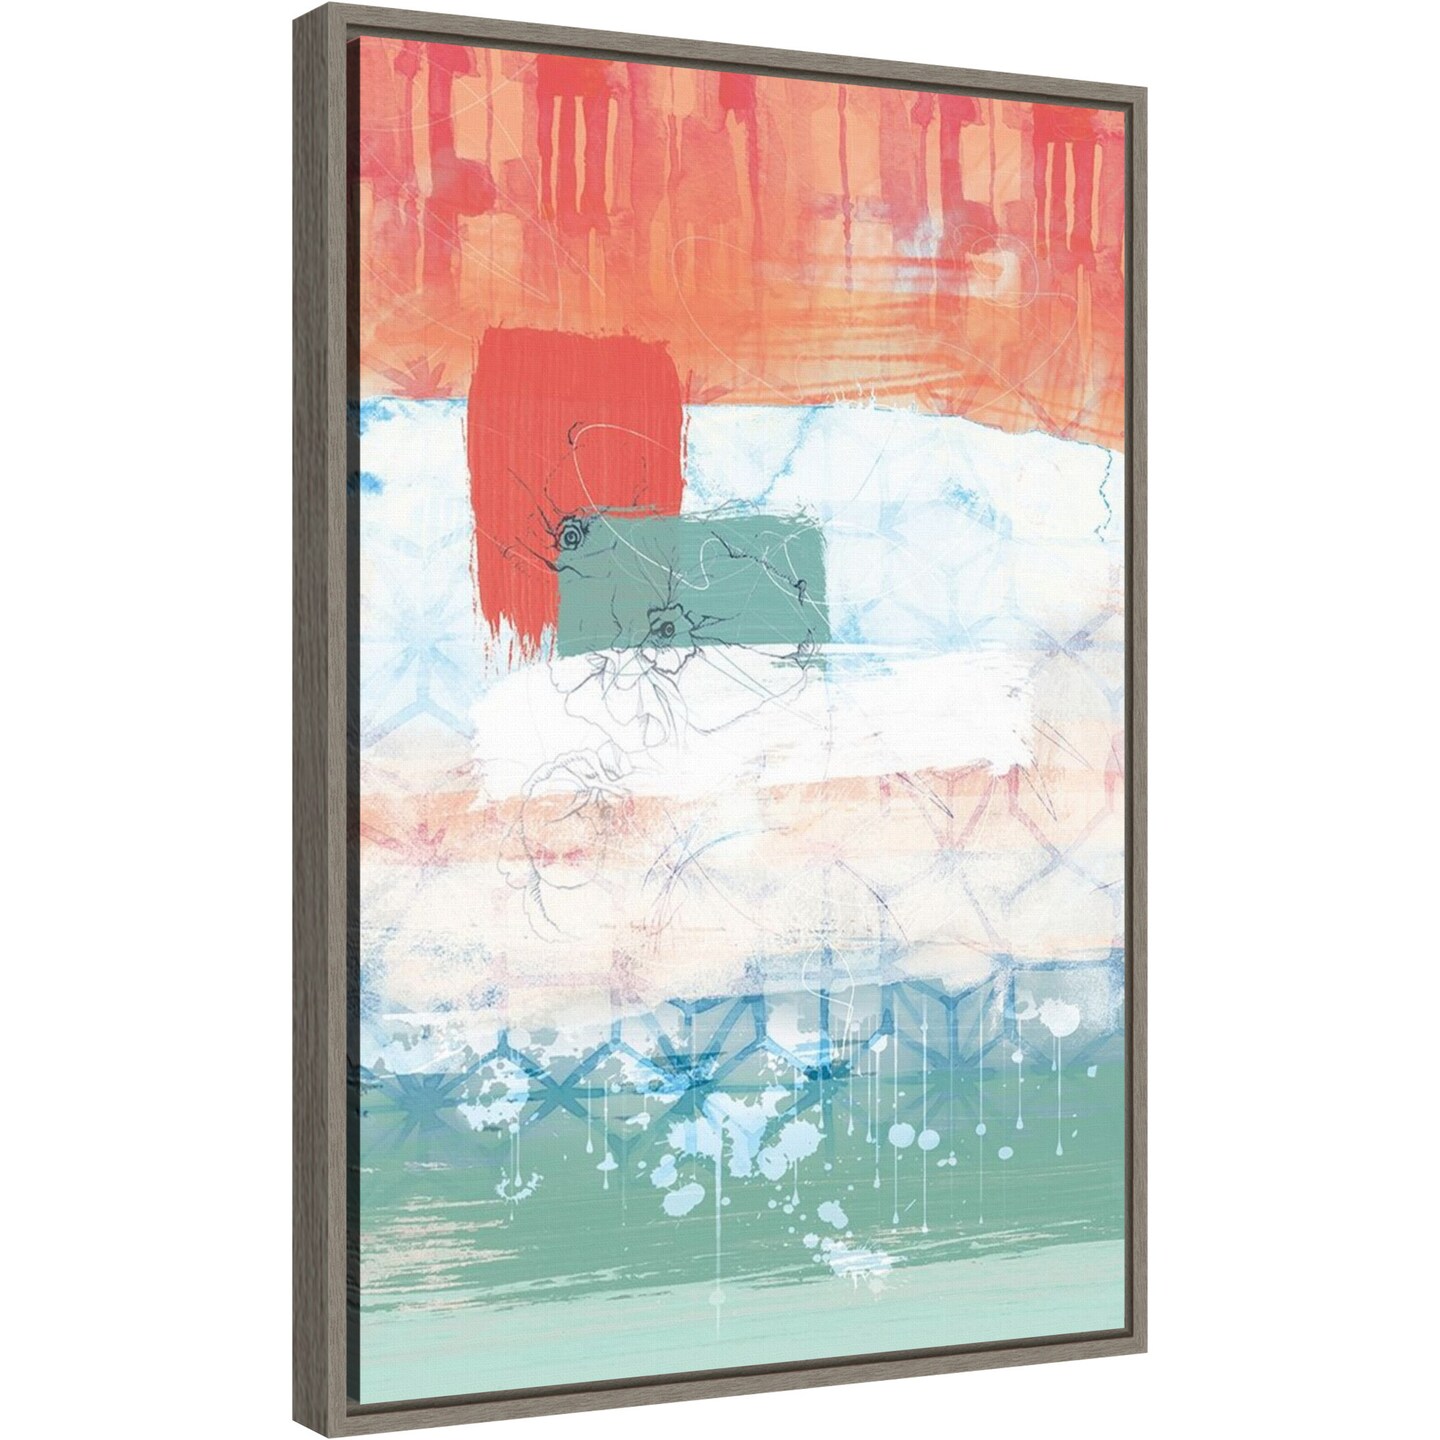 Unexpected Bloom No. 2 by Louis Duncan-He 16-in. W x 23-in. H. Canvas Wall Art Print Framed in Grey